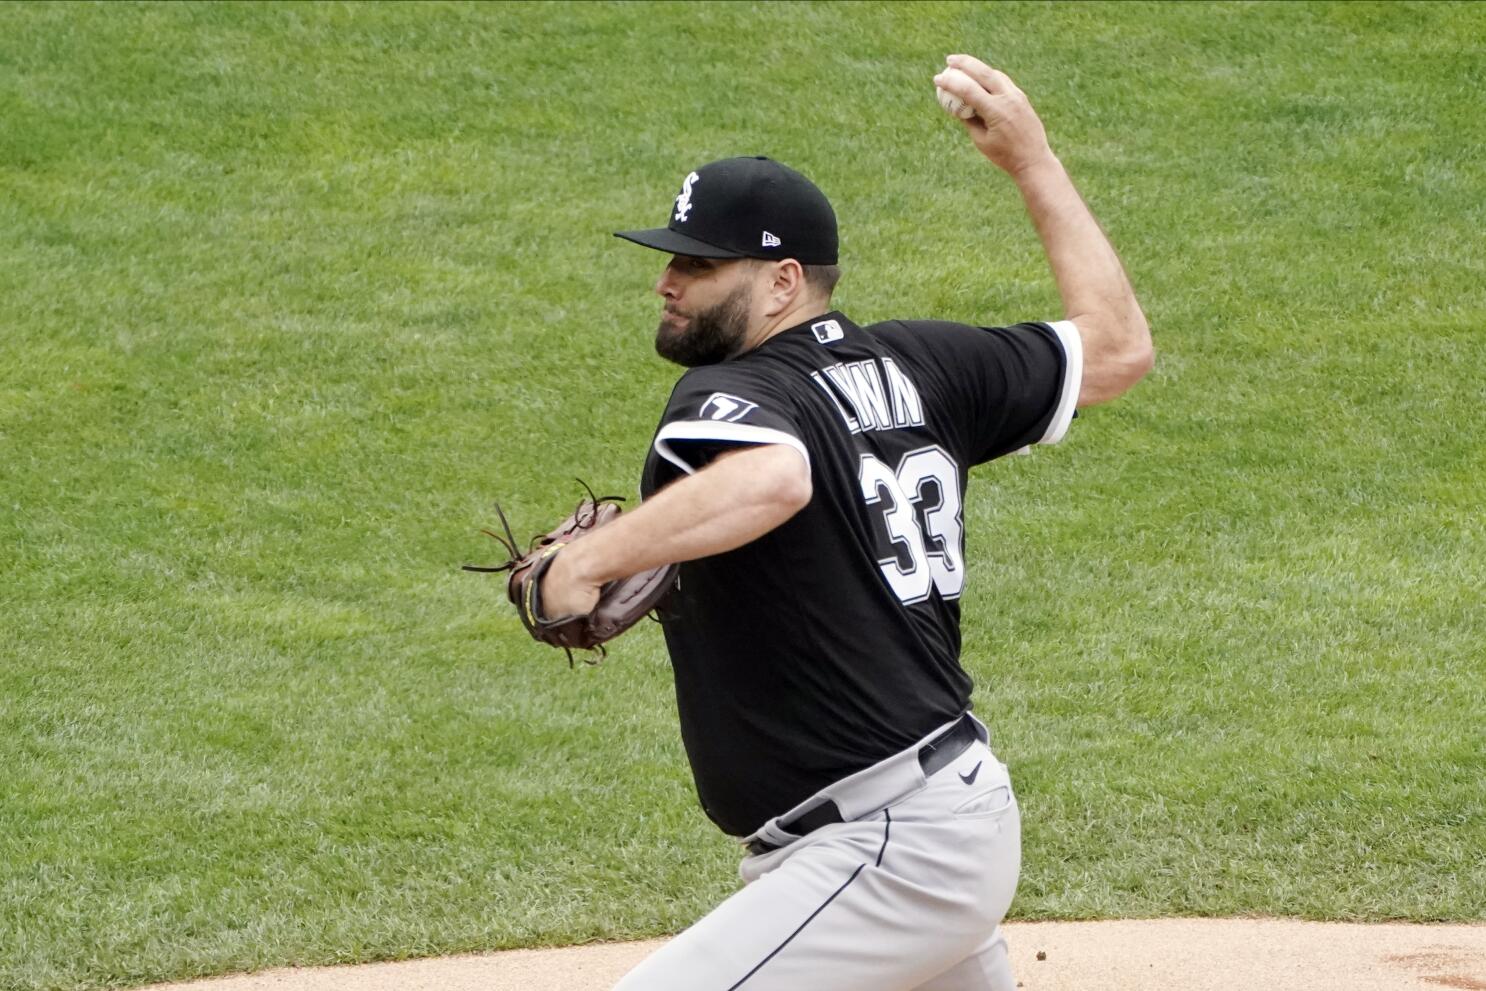 All-Star Lynn wins 6-1 as White Sox improve to 10-2 vs Twins - The